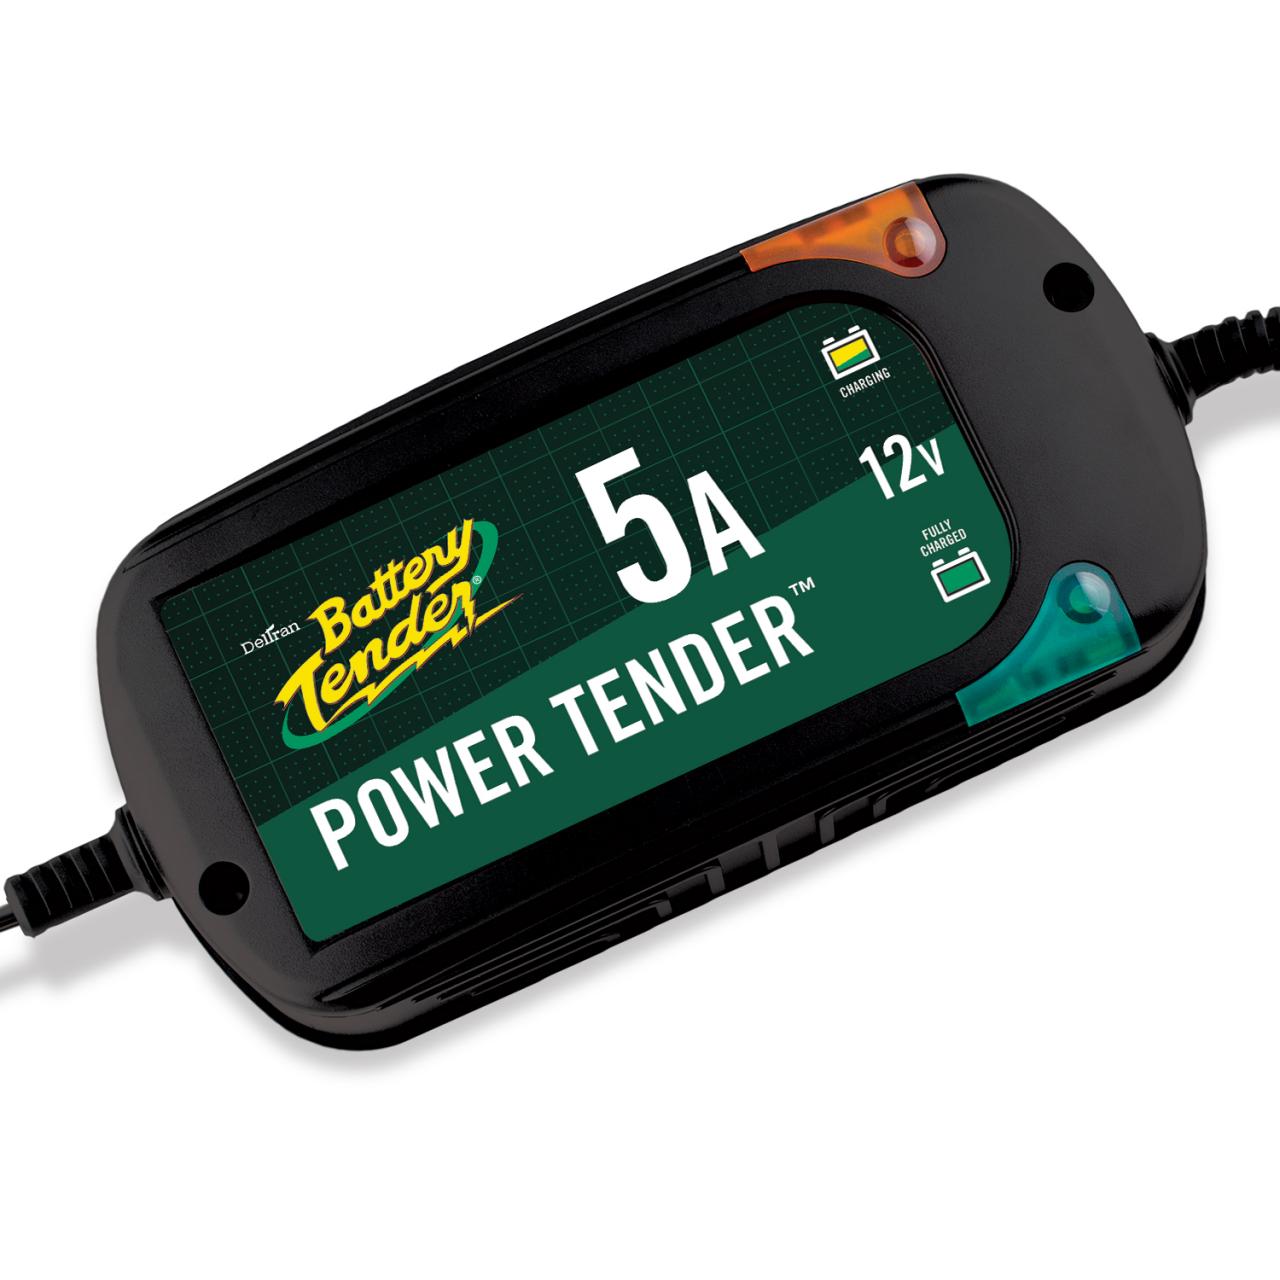 Buy Battery Tender 2-Bank Charger: 12V Battery Charger, 1.25 Amp with 2  Charging Banks - Smart 12V Battery Charger and Maintainer Station Charges  Up to 2 Power Sport Batteries at Once -